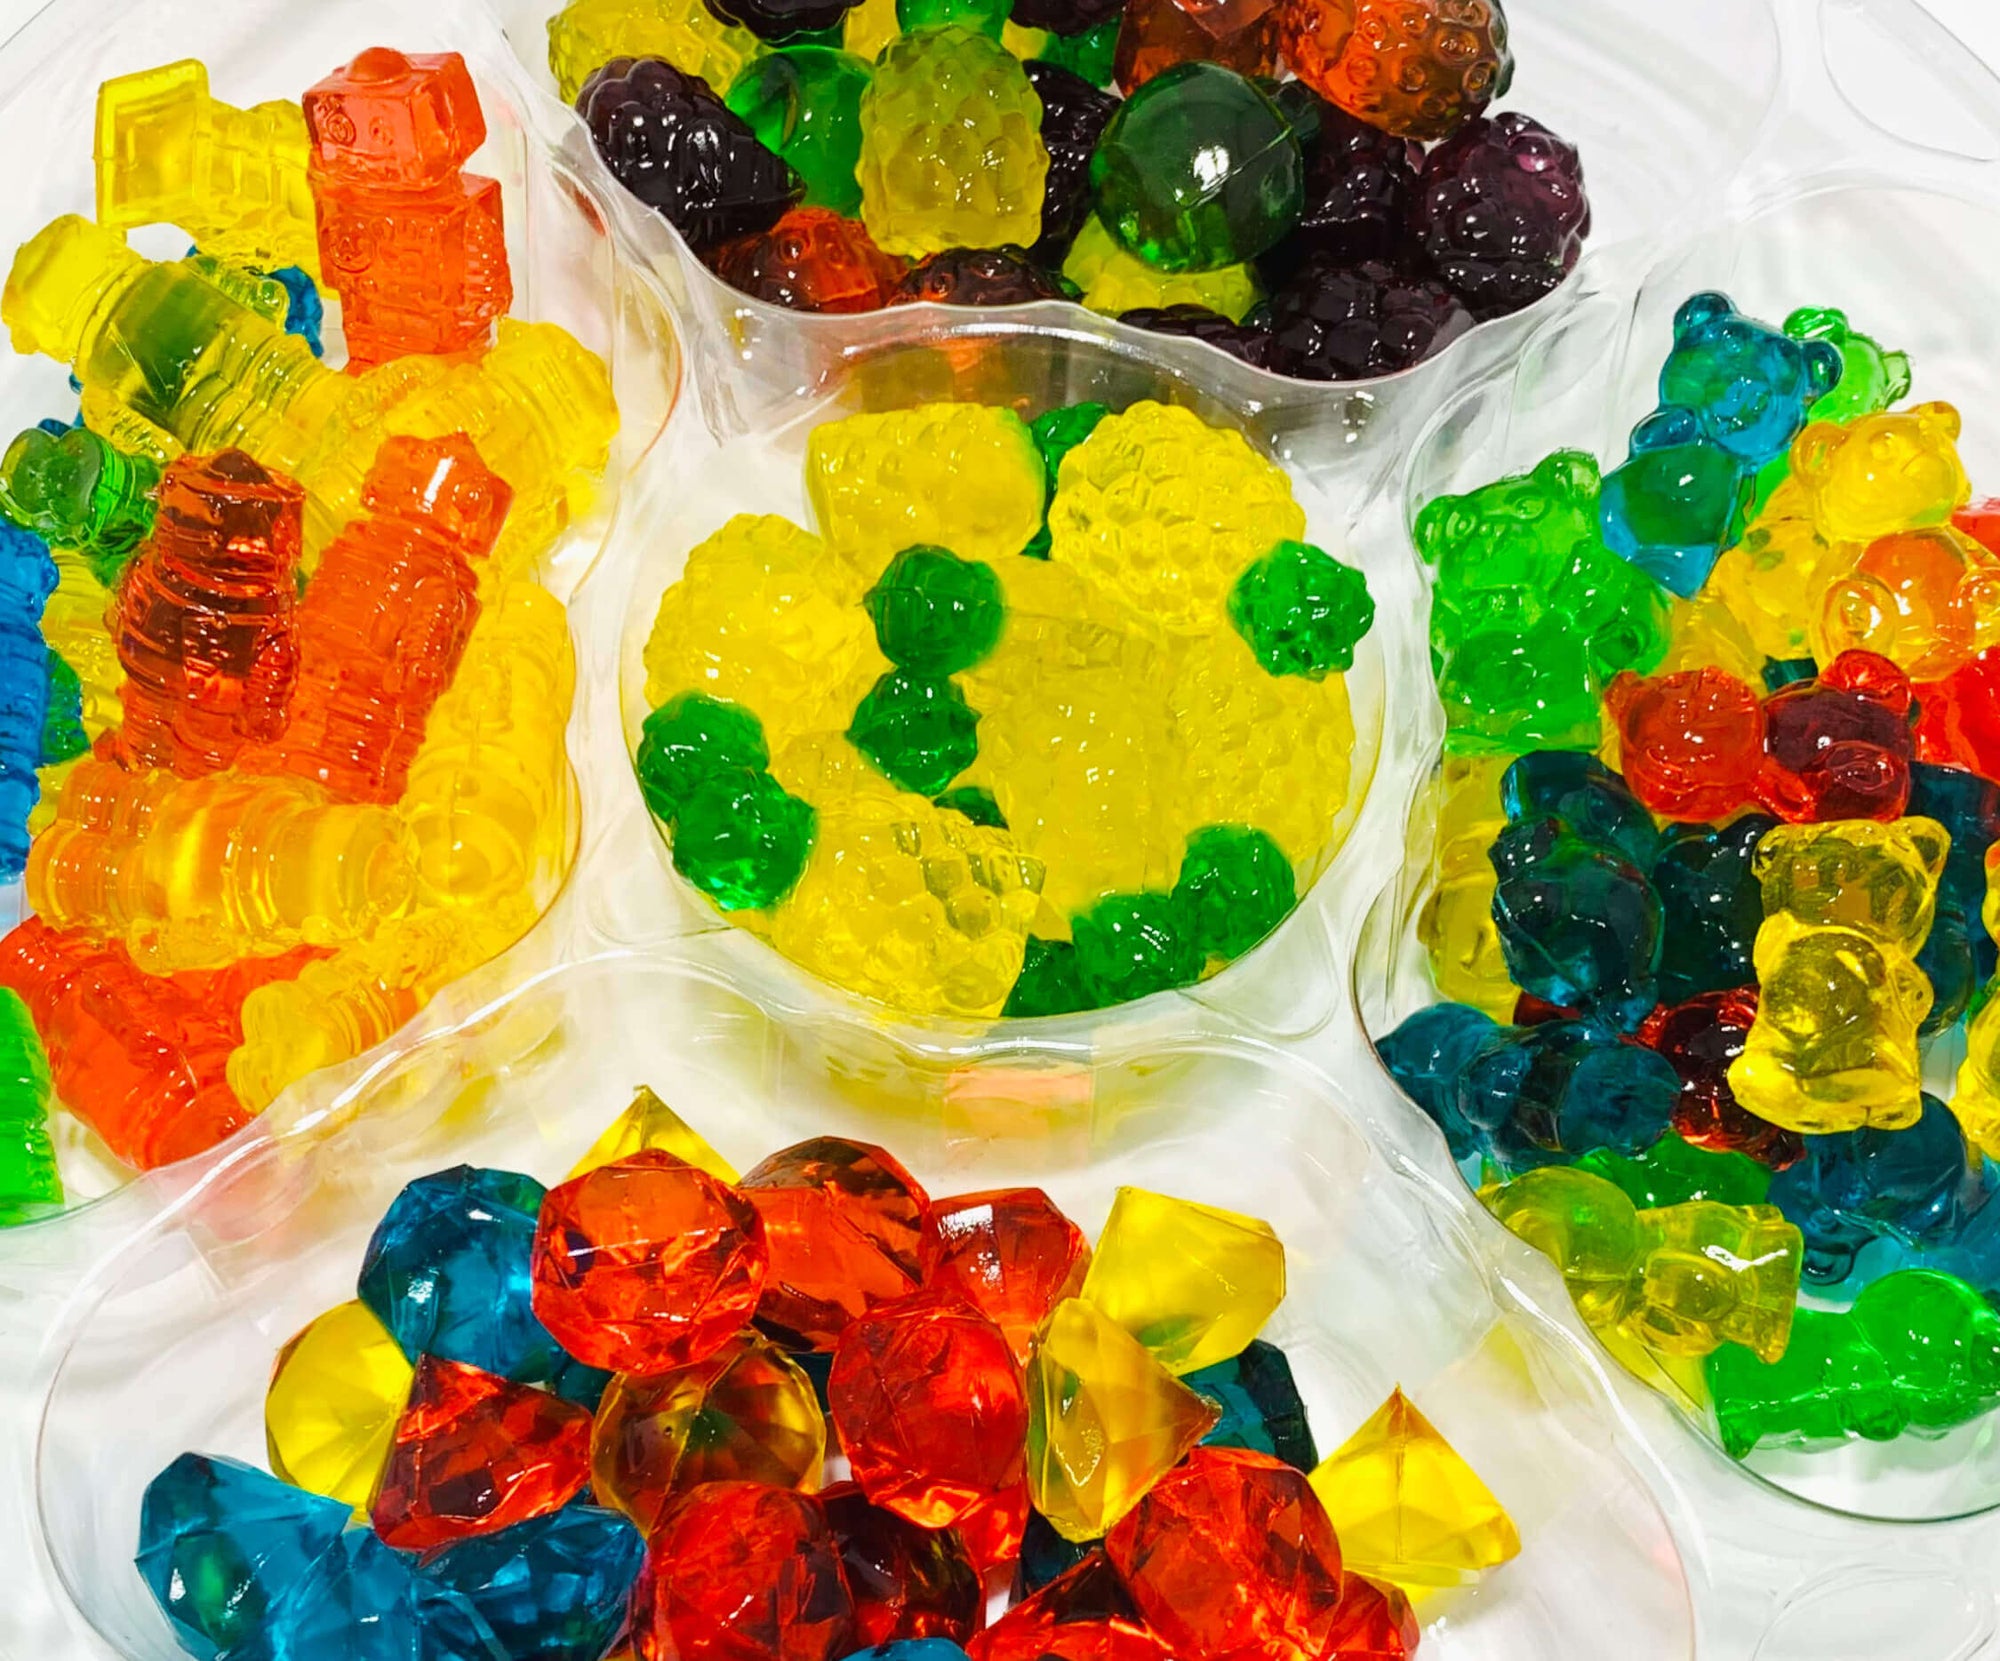 3D Gummy Goldfish in Bulk at Online Candy Store